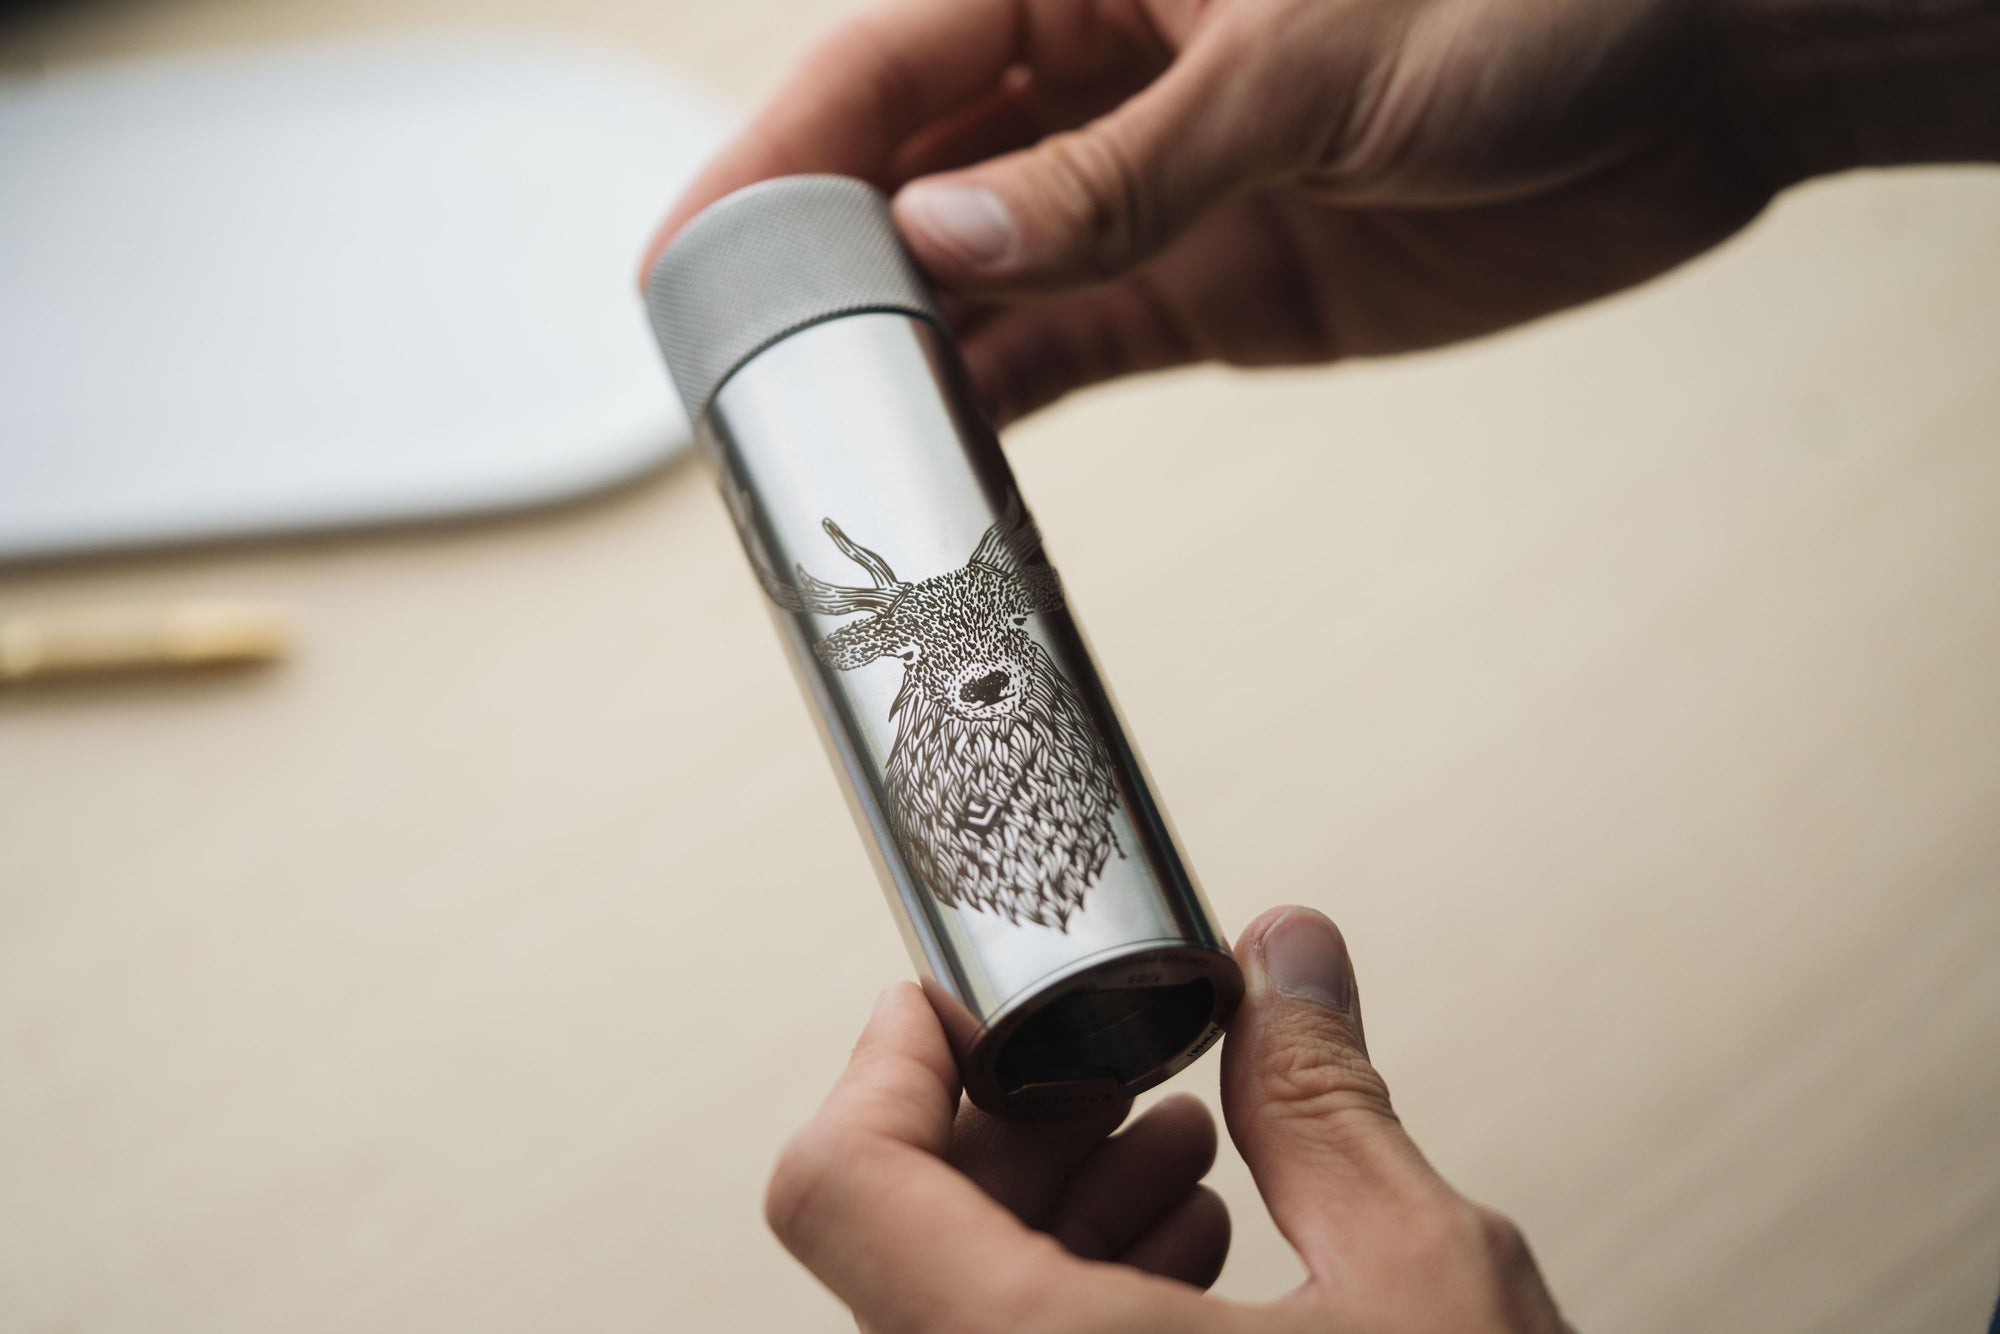 Stainless steel hip flask by Wingback engraved with an illustration of a red stag by artist Os Illustration